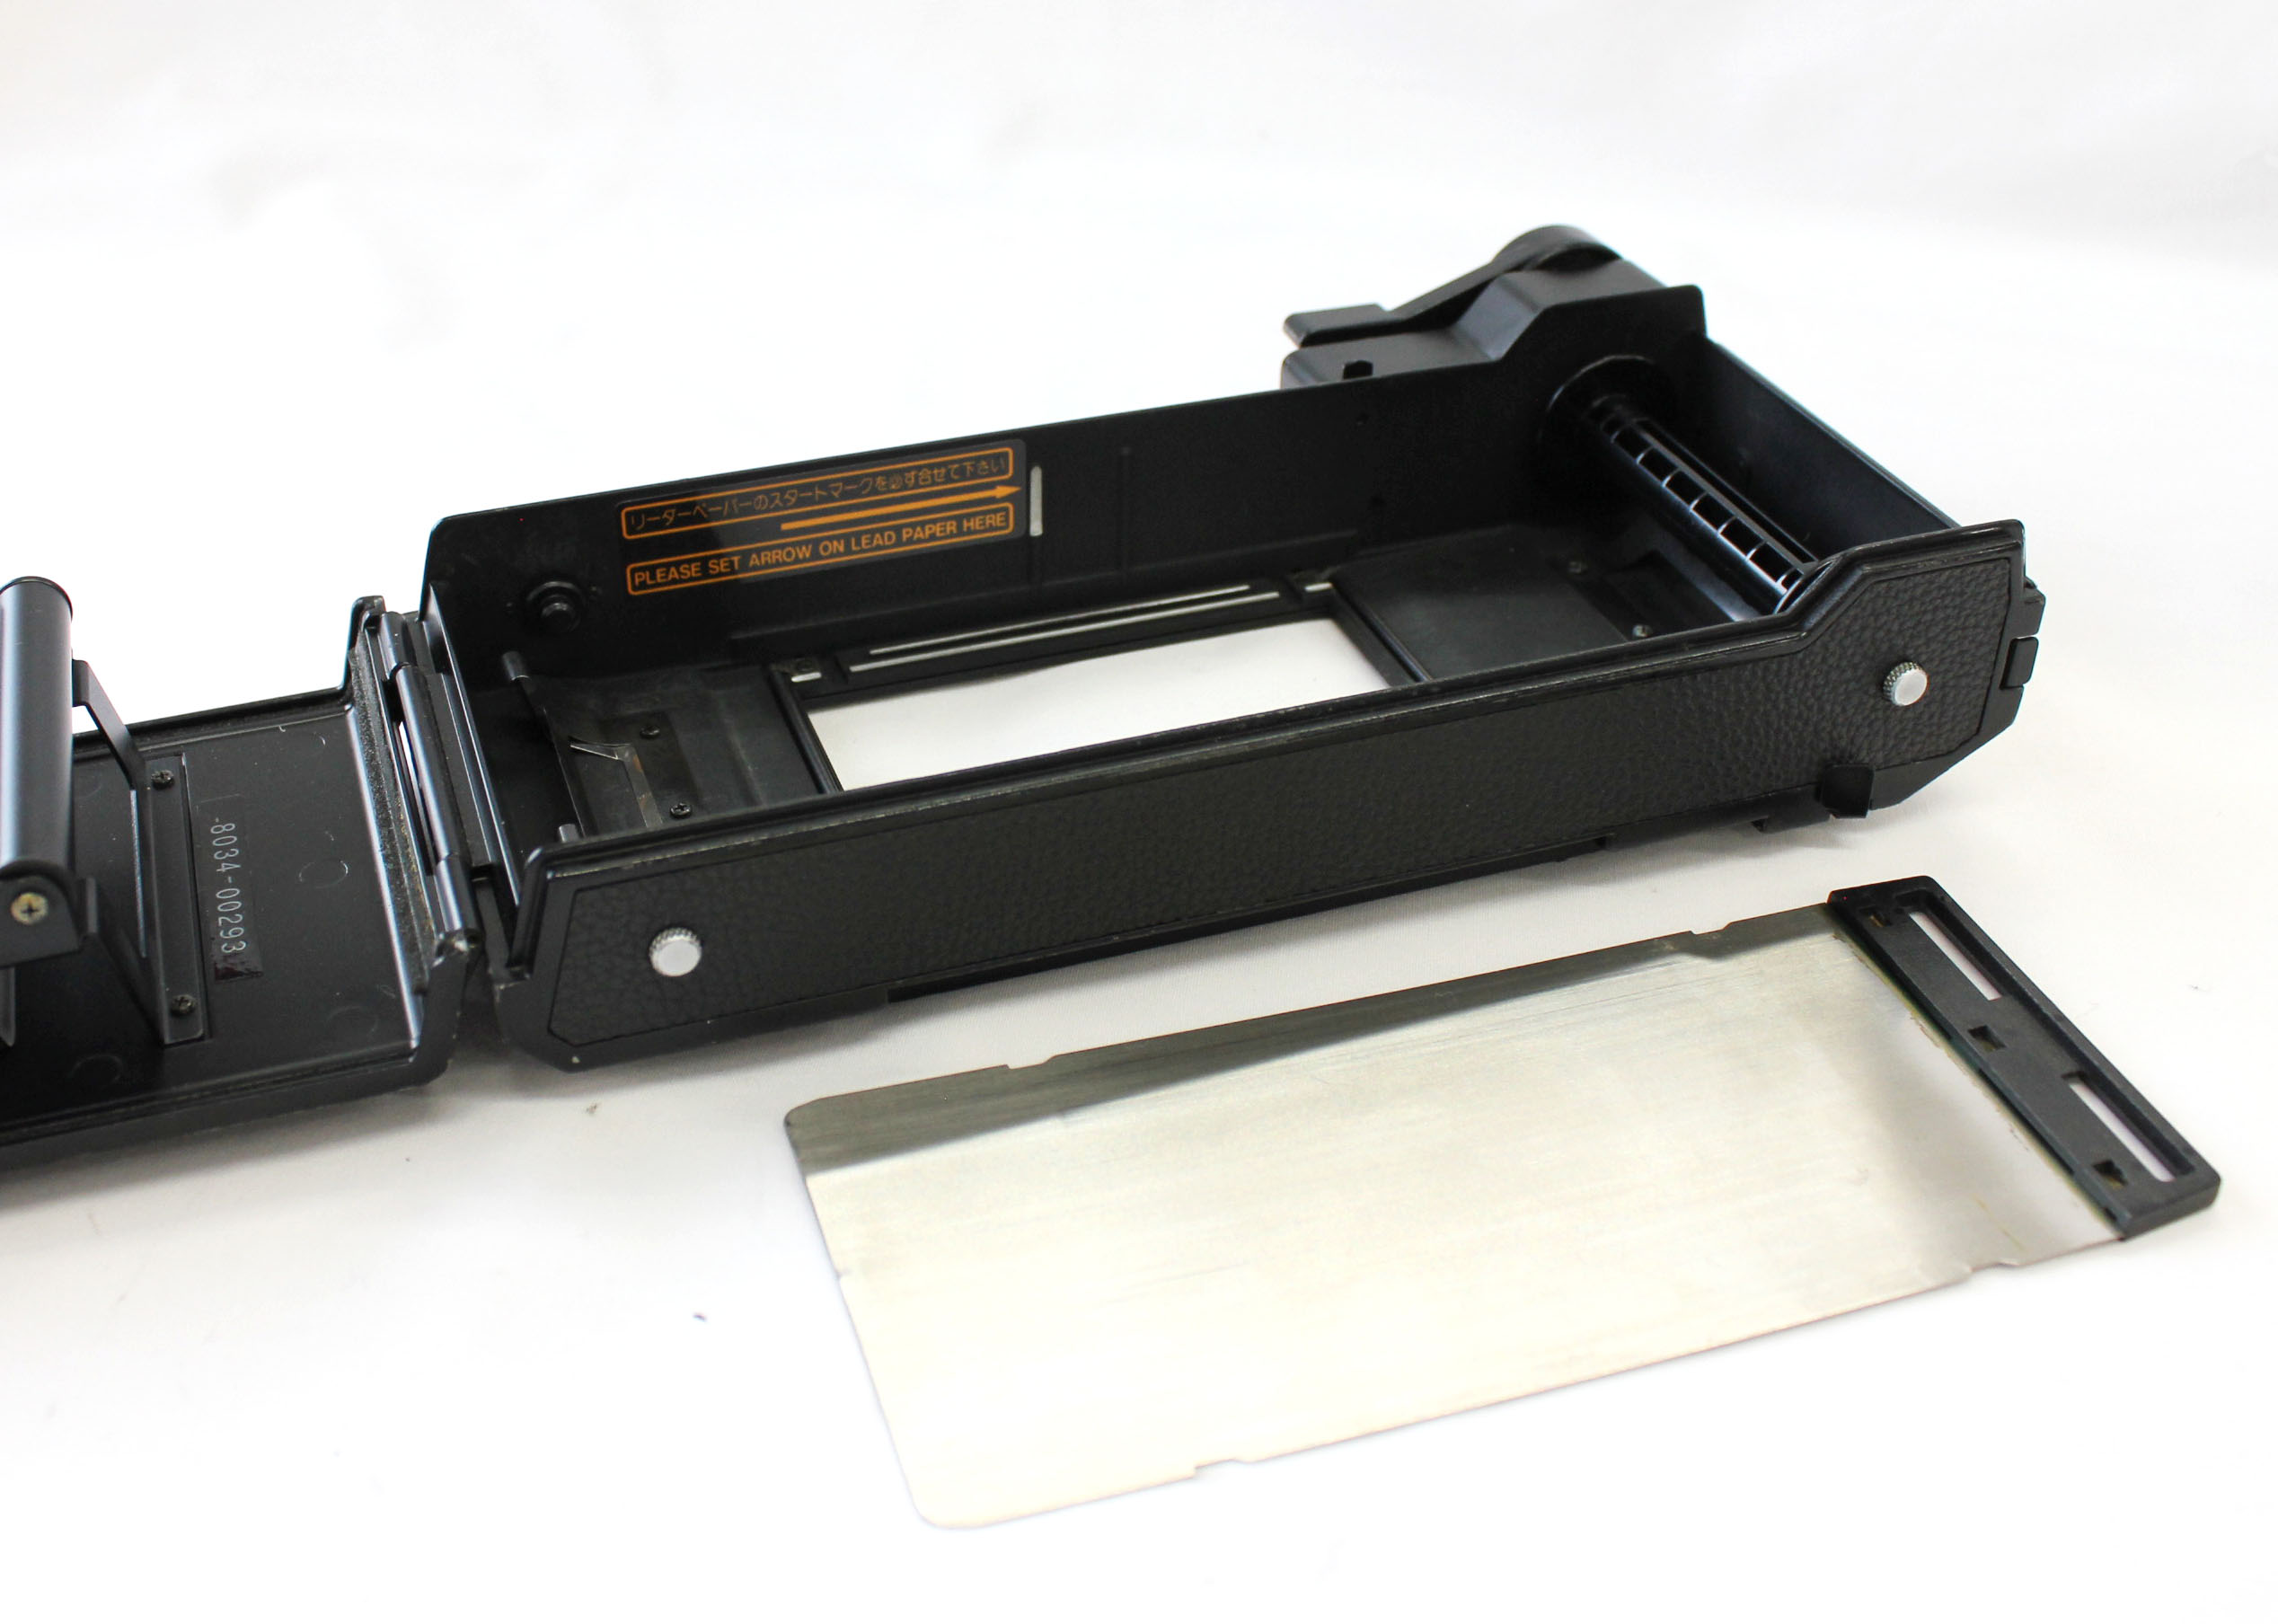 TOYO Roll Film Holder Back 69 6x9 No.8034 RFH69 for Large Format Camera from Japan Photo 5